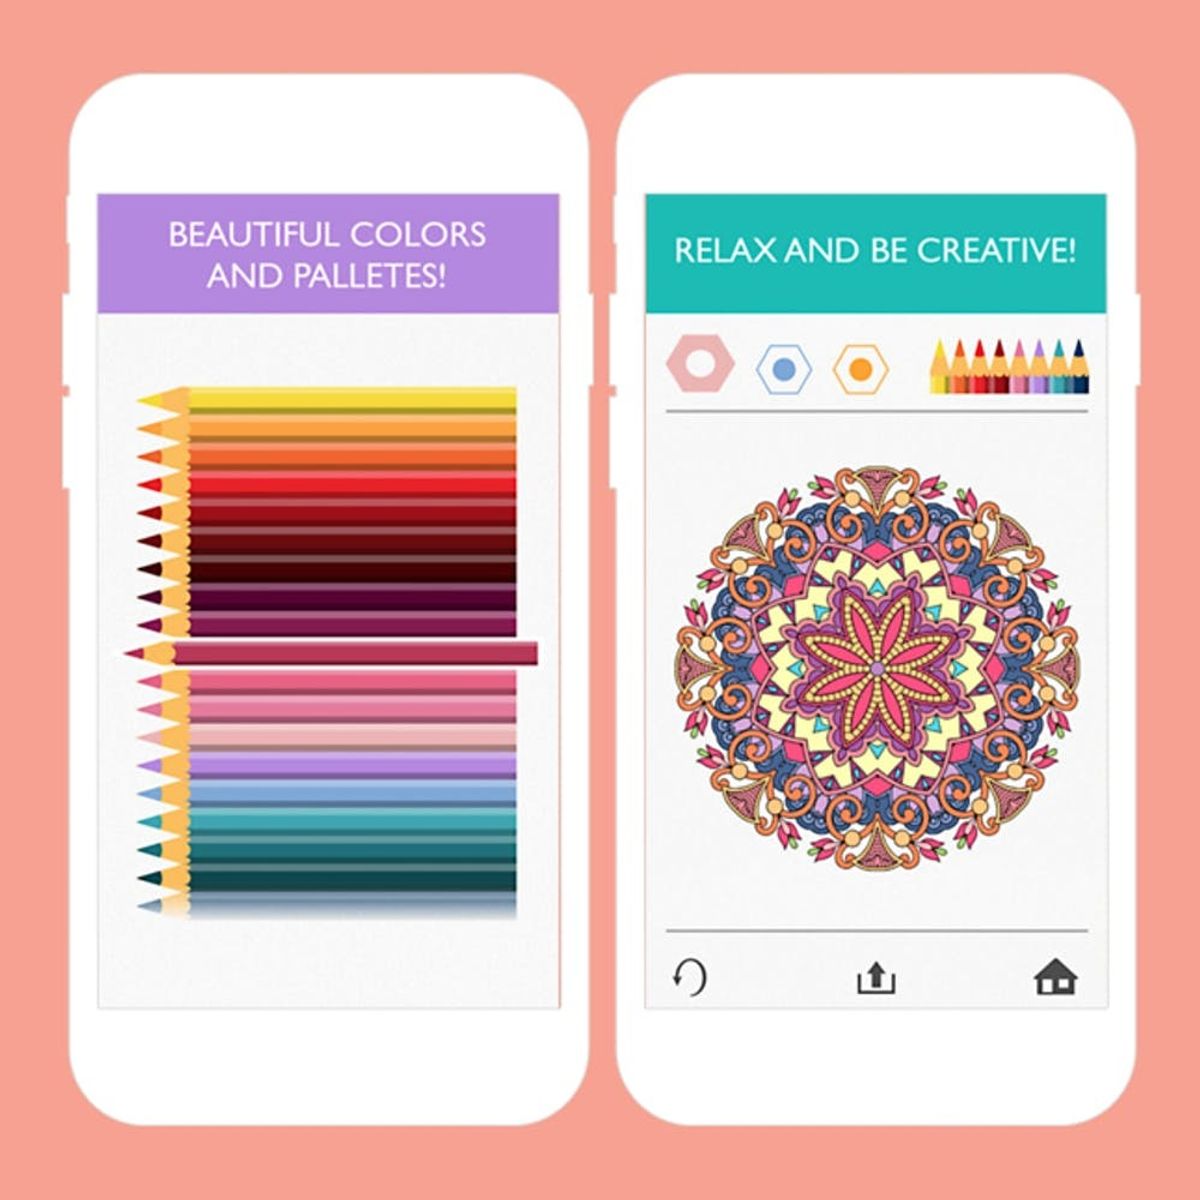 5 Best Apps of the Week: A Coloring App for Adults + More!